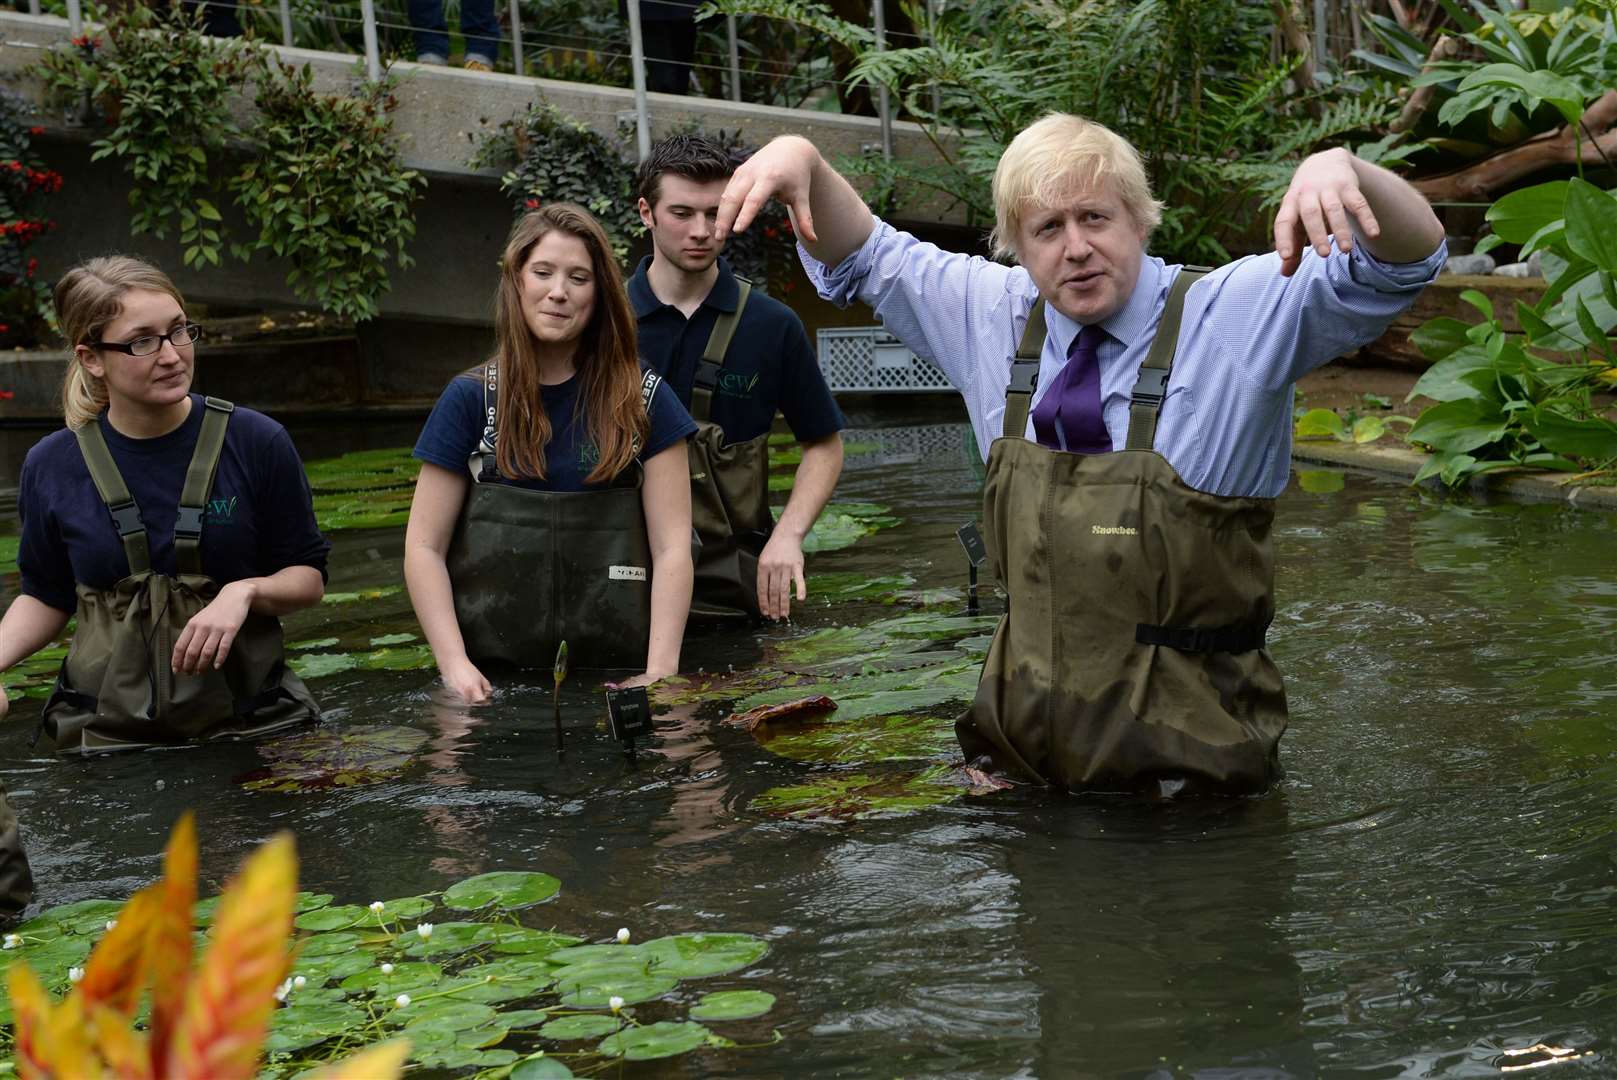 Donning a pair of fishing waders to help plant flowers at the Royal Botanical Gardens at Kew (Stefan Rousseau/PA)